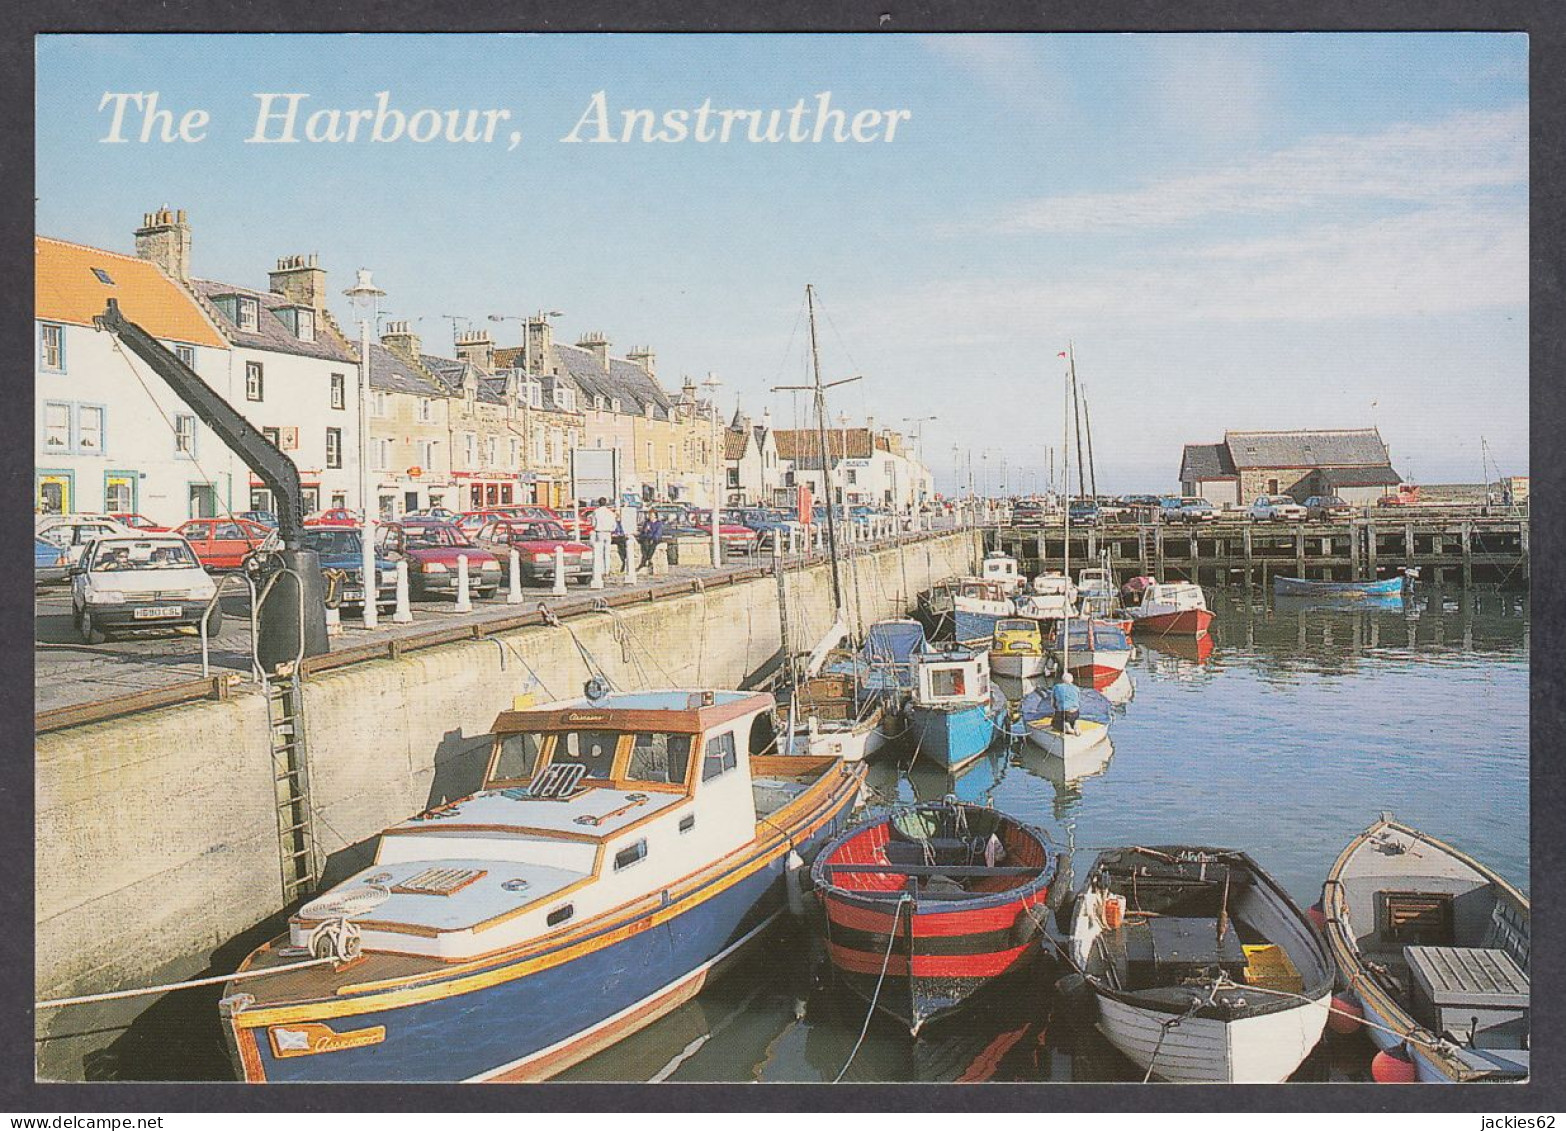 111199/ ANSTRUTHER, The Harbour - Fife